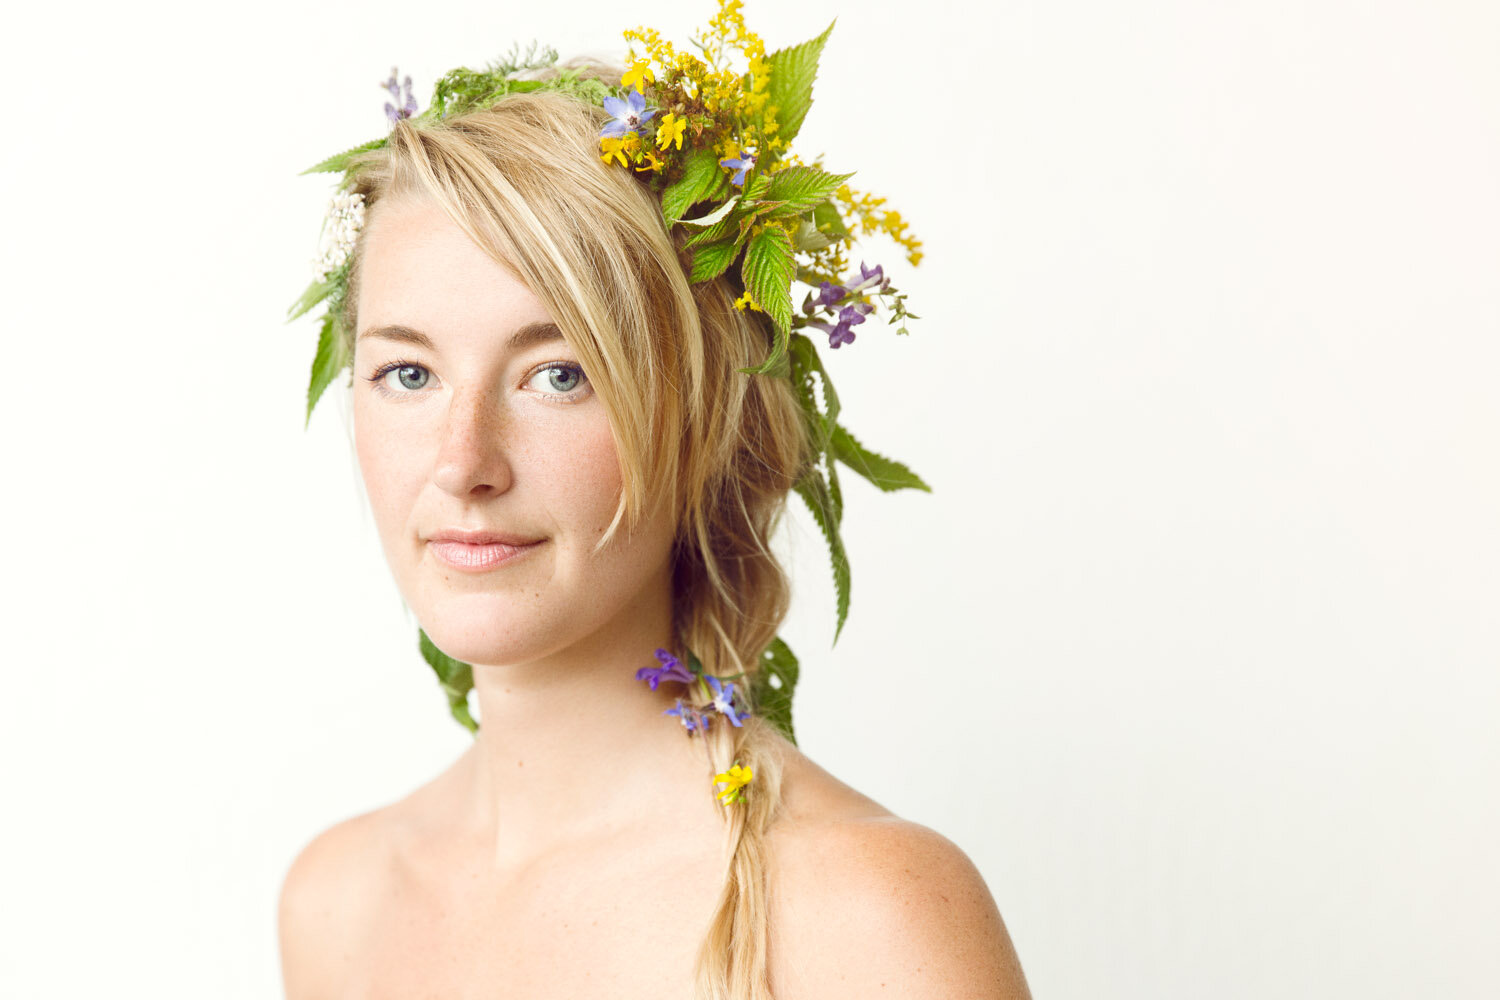 beautiful portrait of herbalist woman with herbal floral crown by portrait photographer Hanna Agar